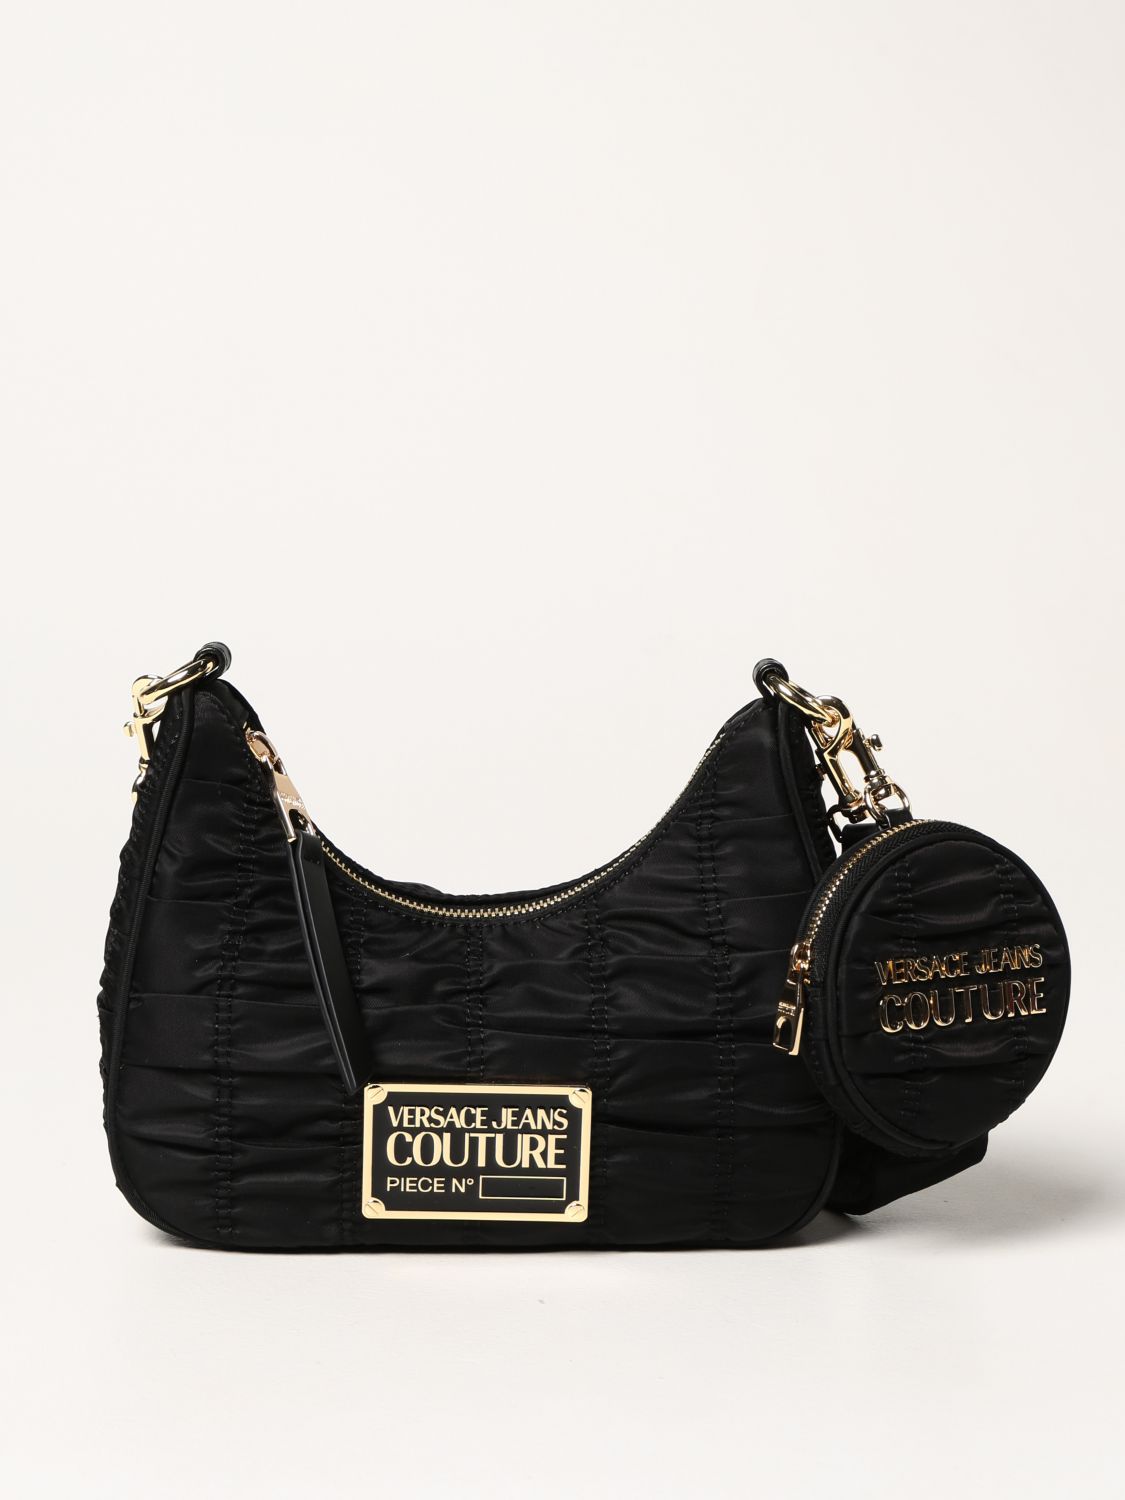 Top 58+ imagen versace jeans couture bags - Ecover.mx